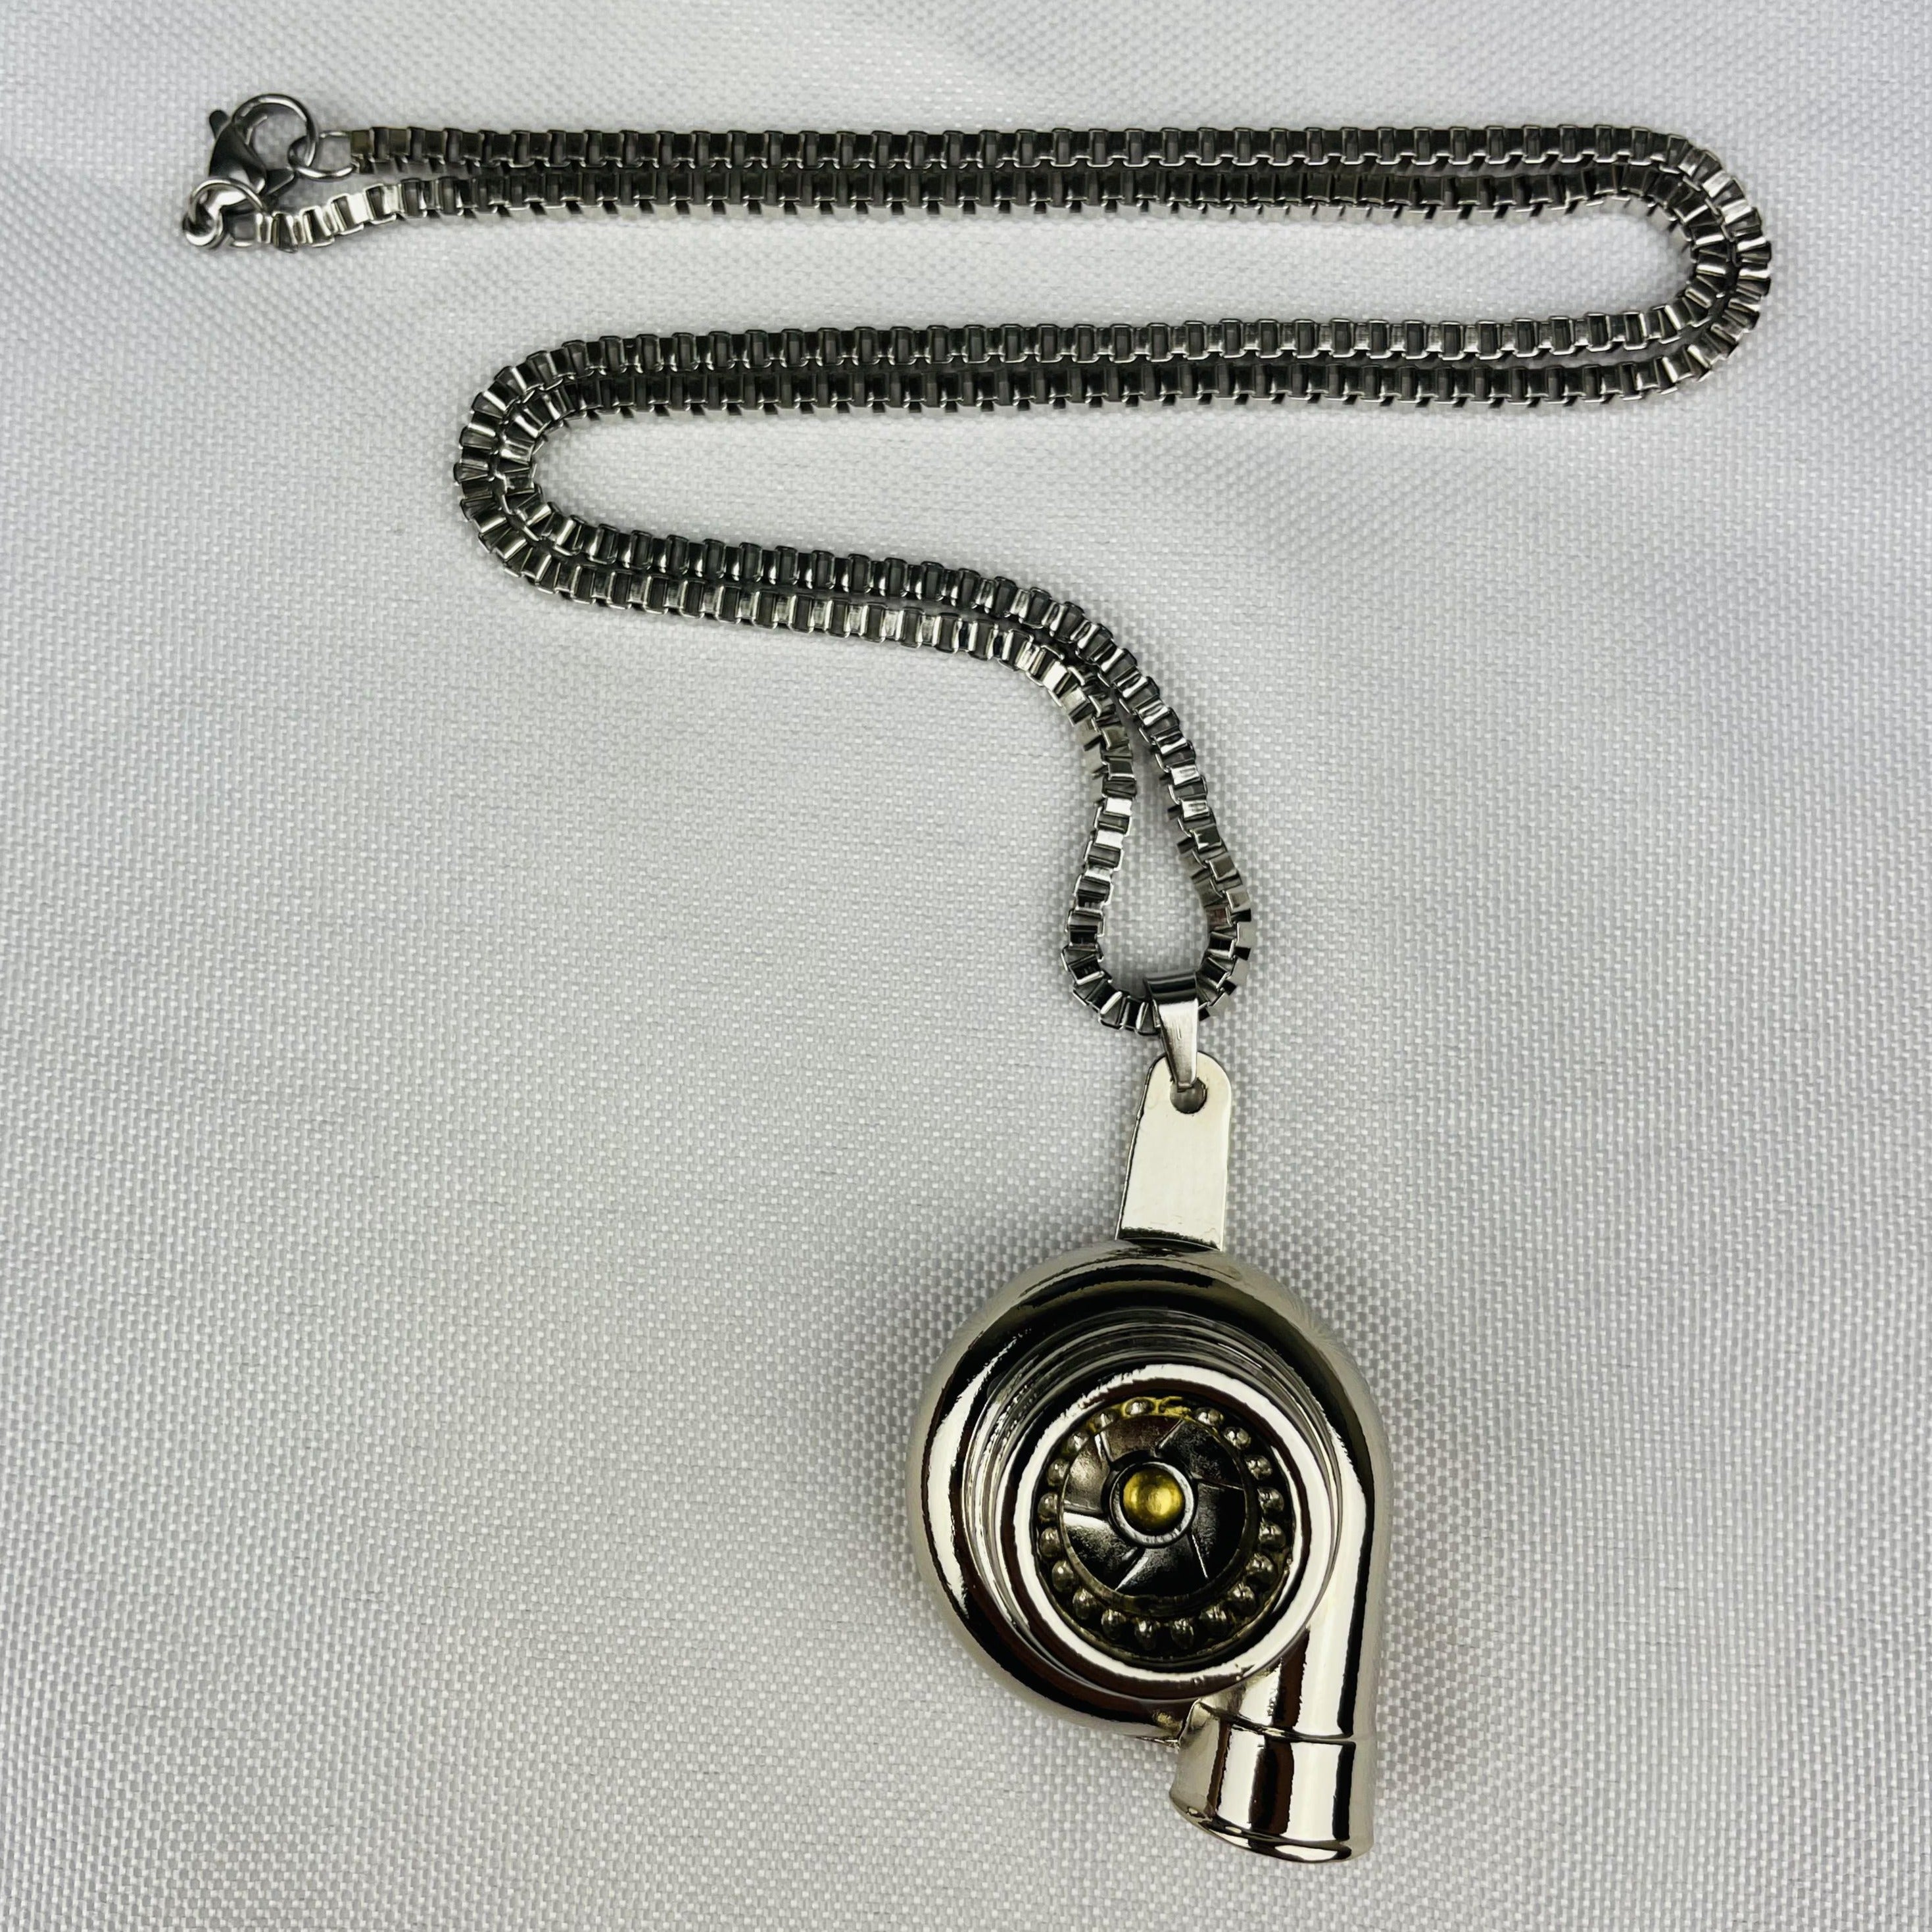 Turbo necklace